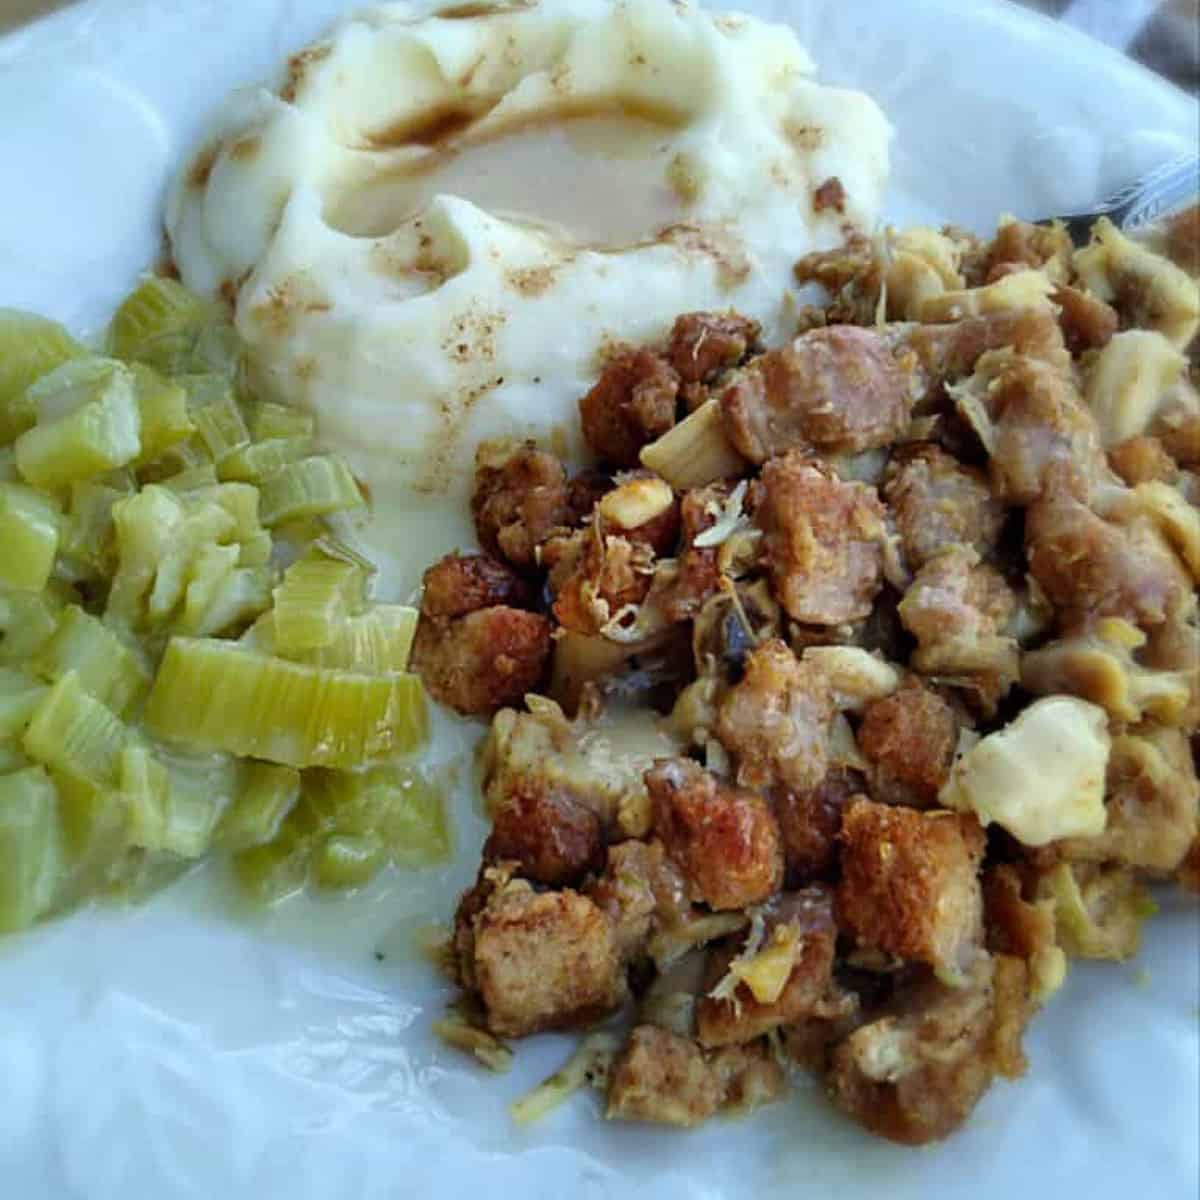 Amish wedding food on a plate: roasht, cooked celery, and mashed potatoes with gravy.